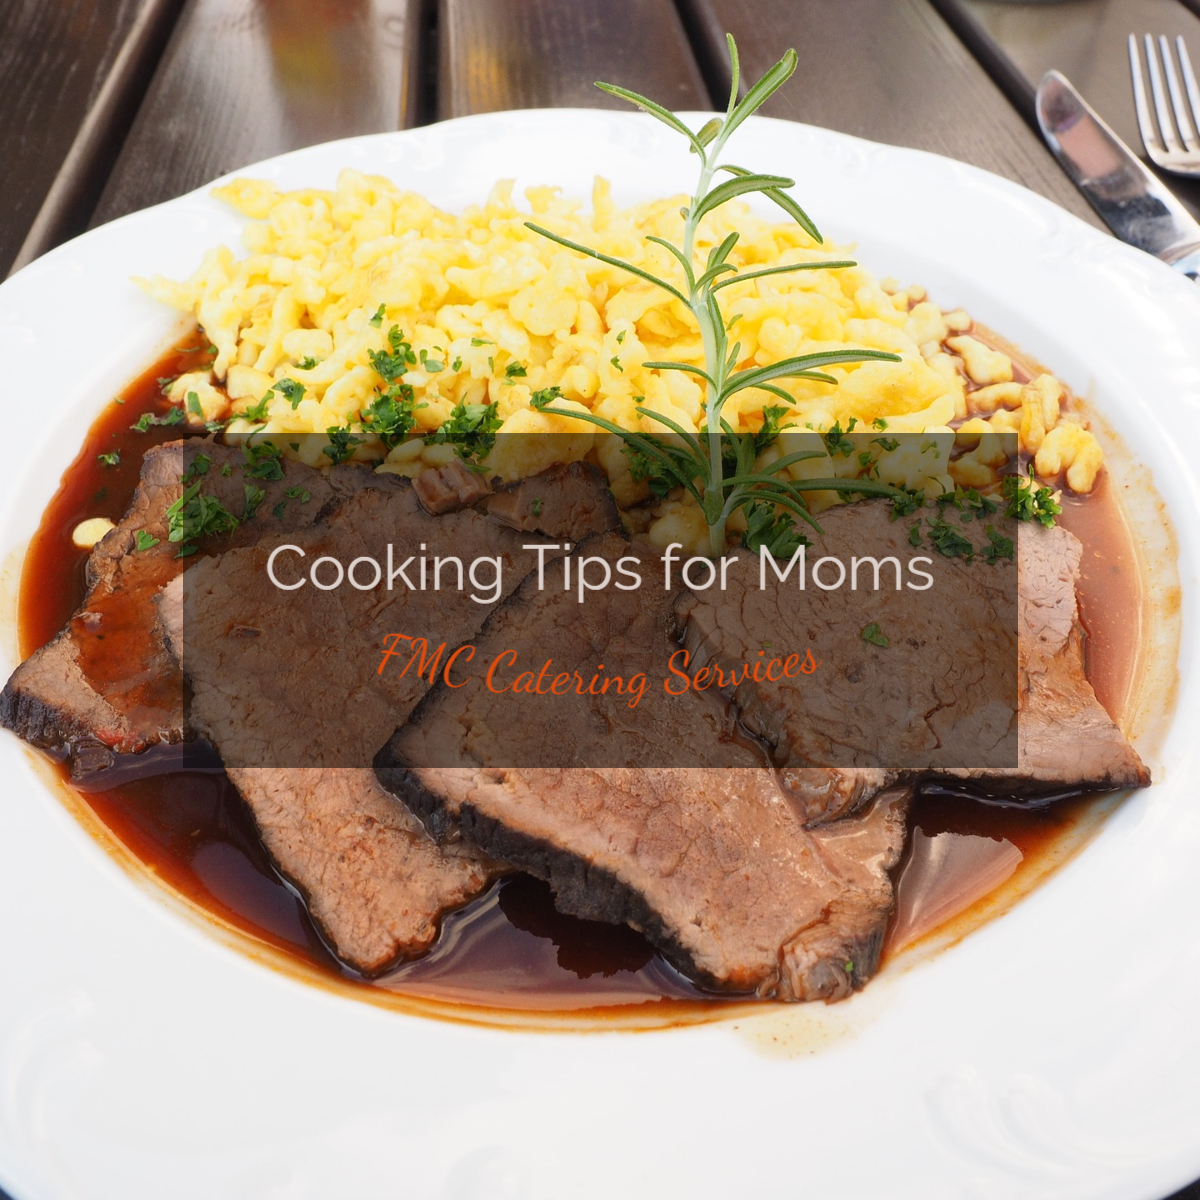 Cooking Tips for Moms